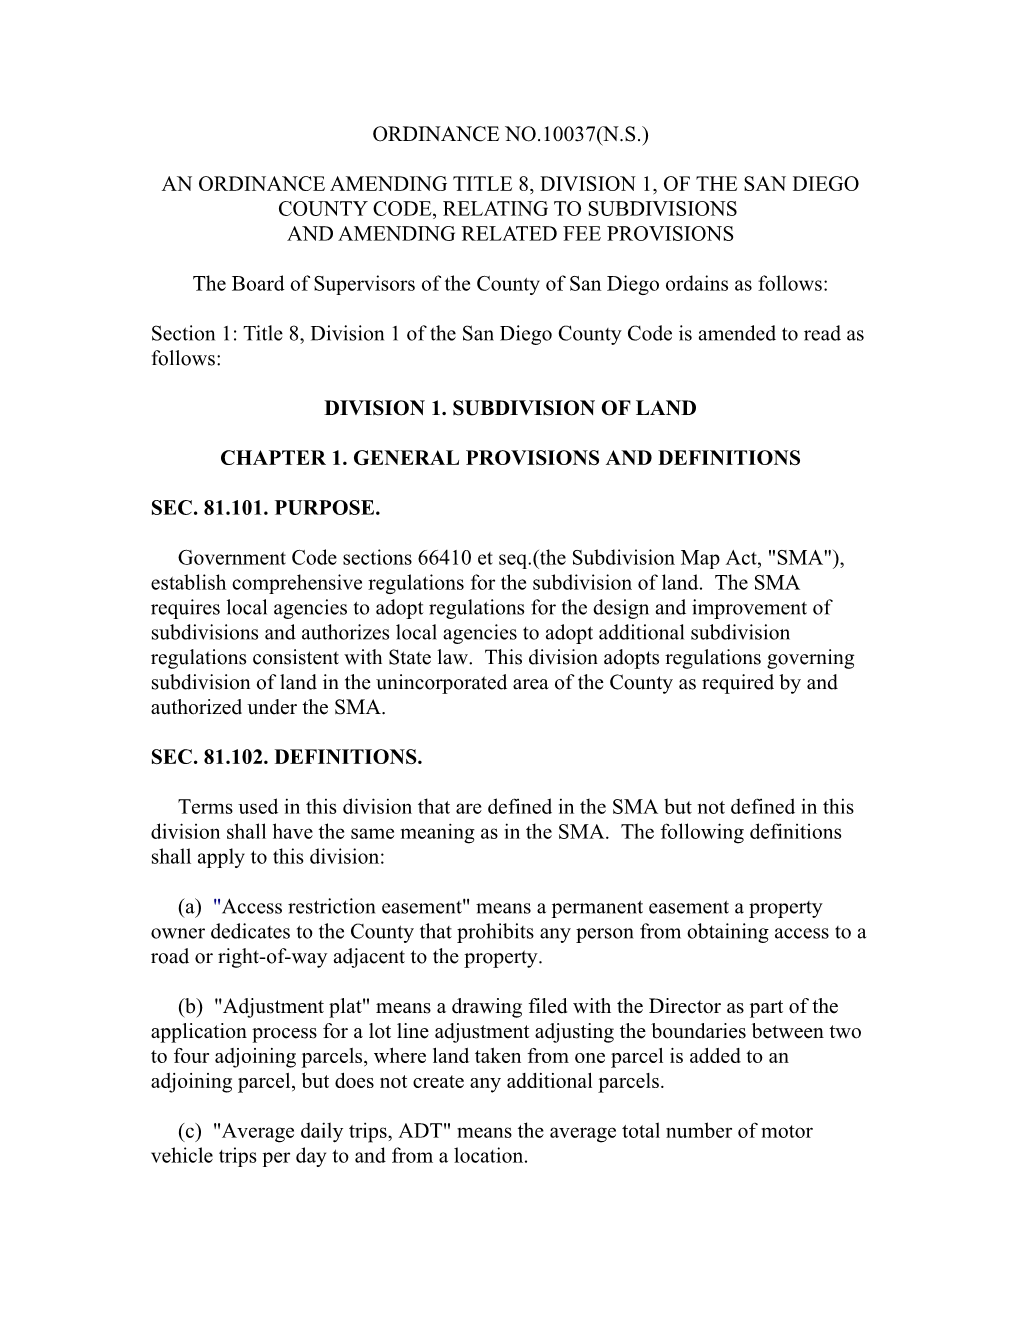 An Ordinance Amending Title 8, Division 1, of the San Diegocountycode, Relating to Subdivisions